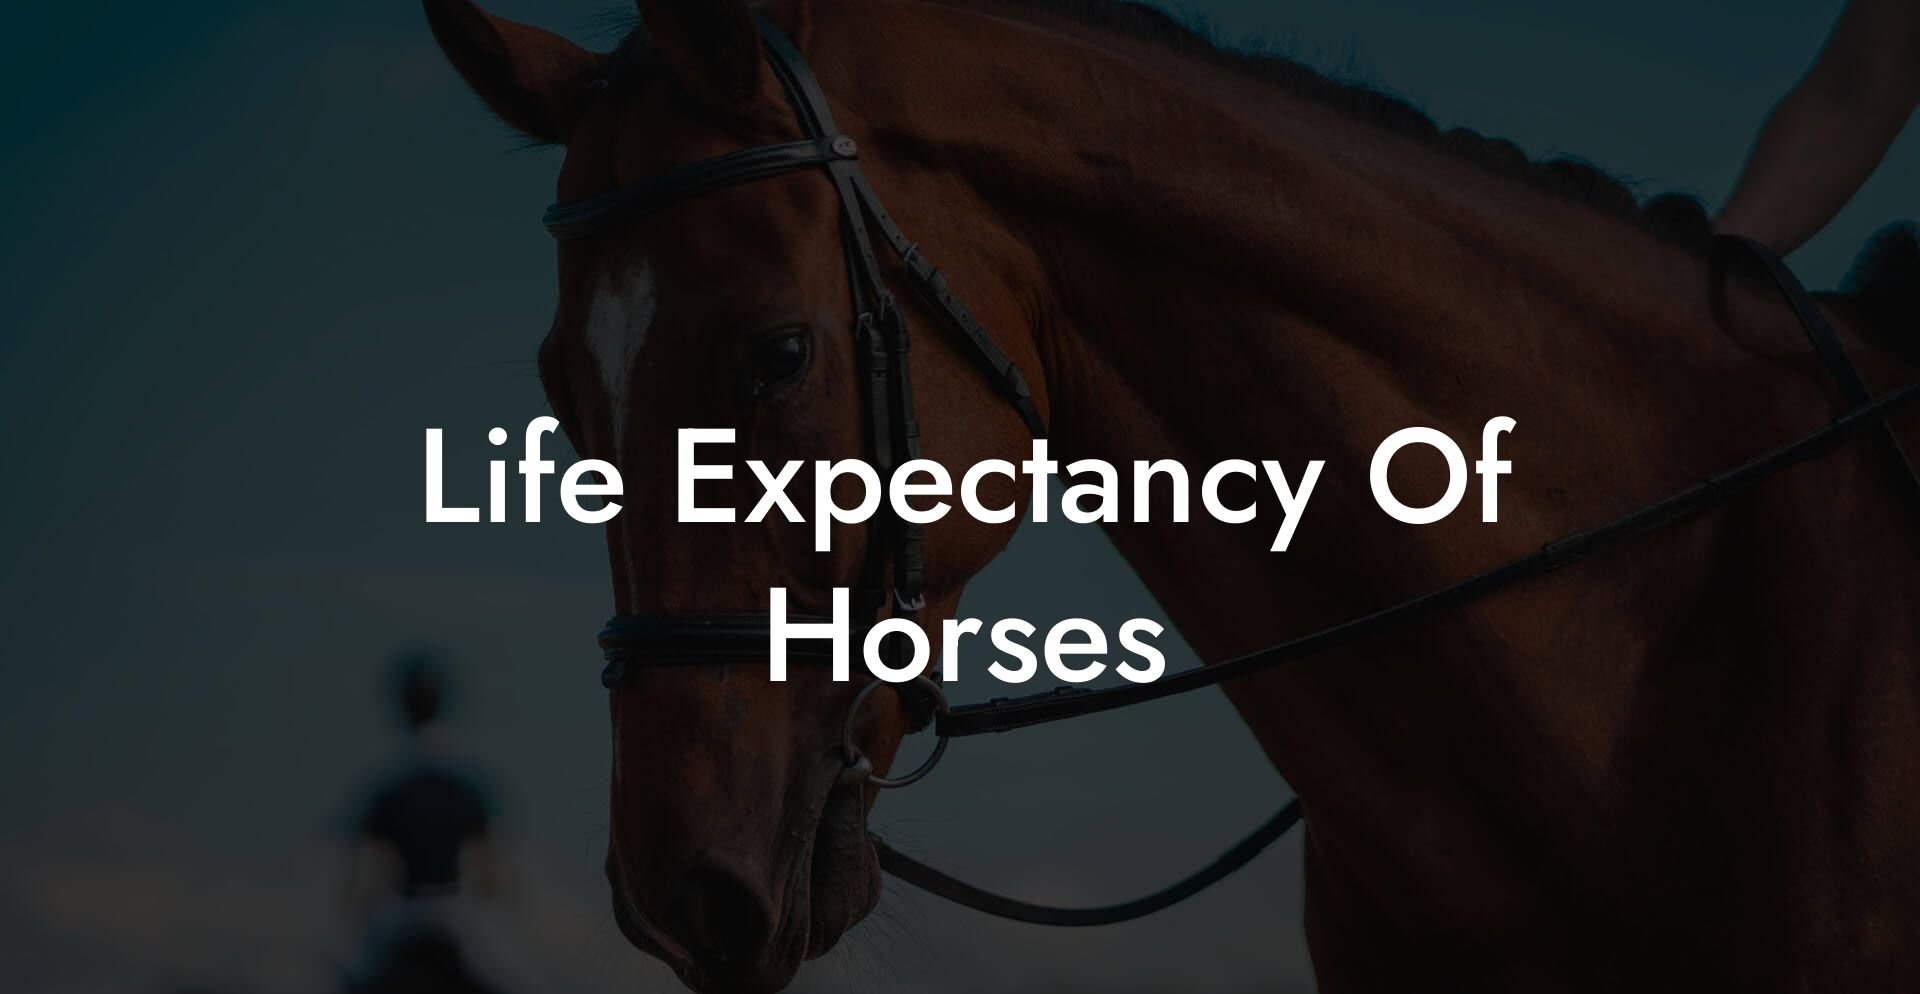 Life Expectancy Of Horses